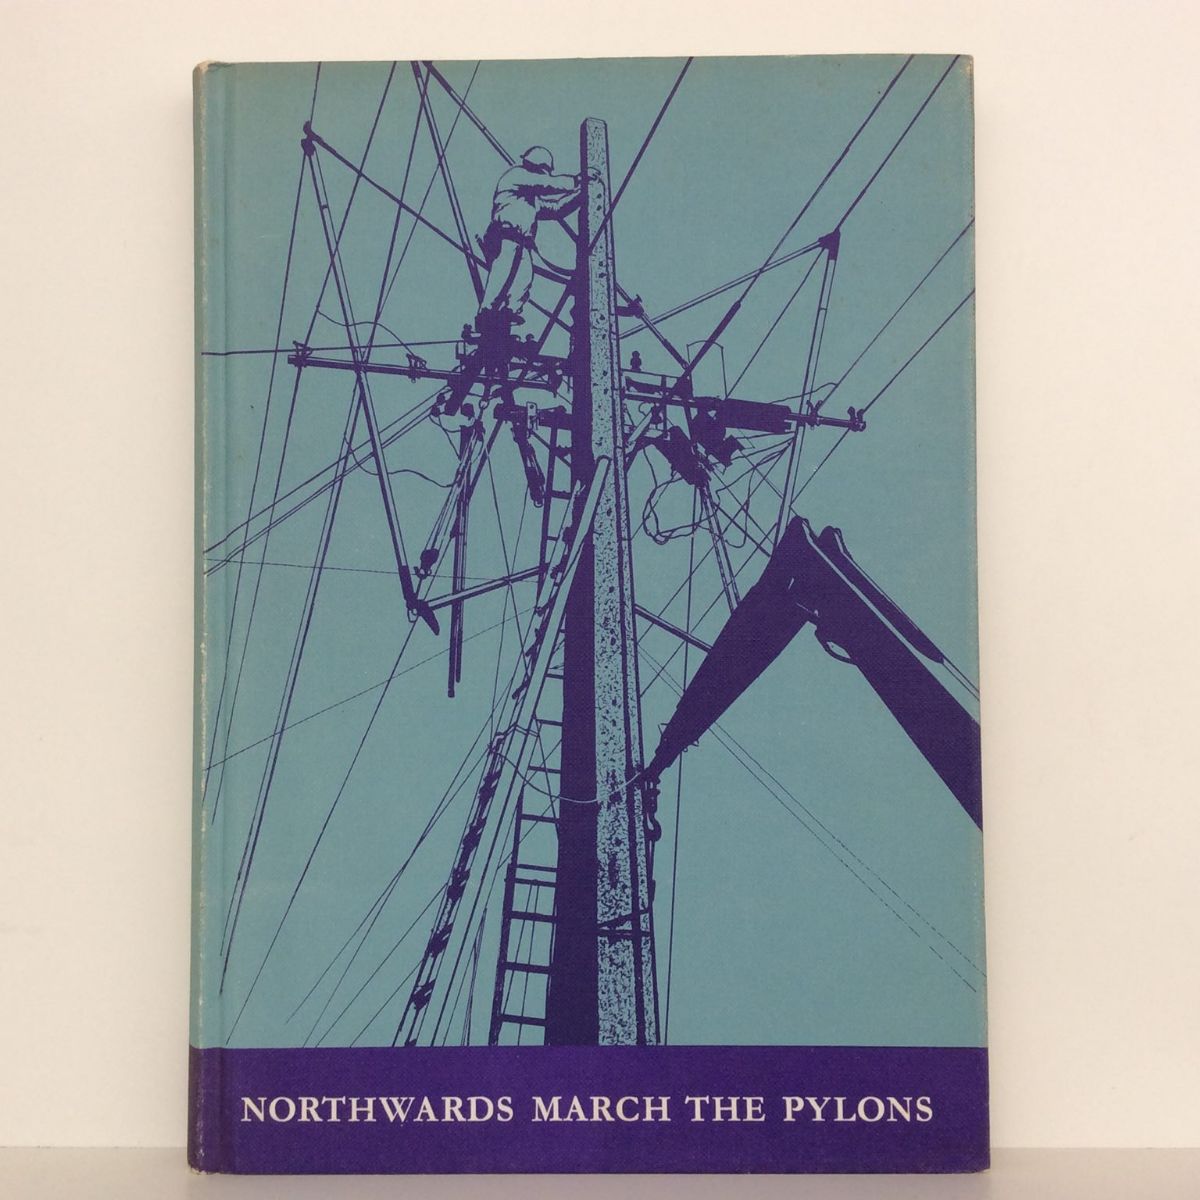 NORTHWARDS MARCH THE PYLONS: A History of The Waitemata Power Board